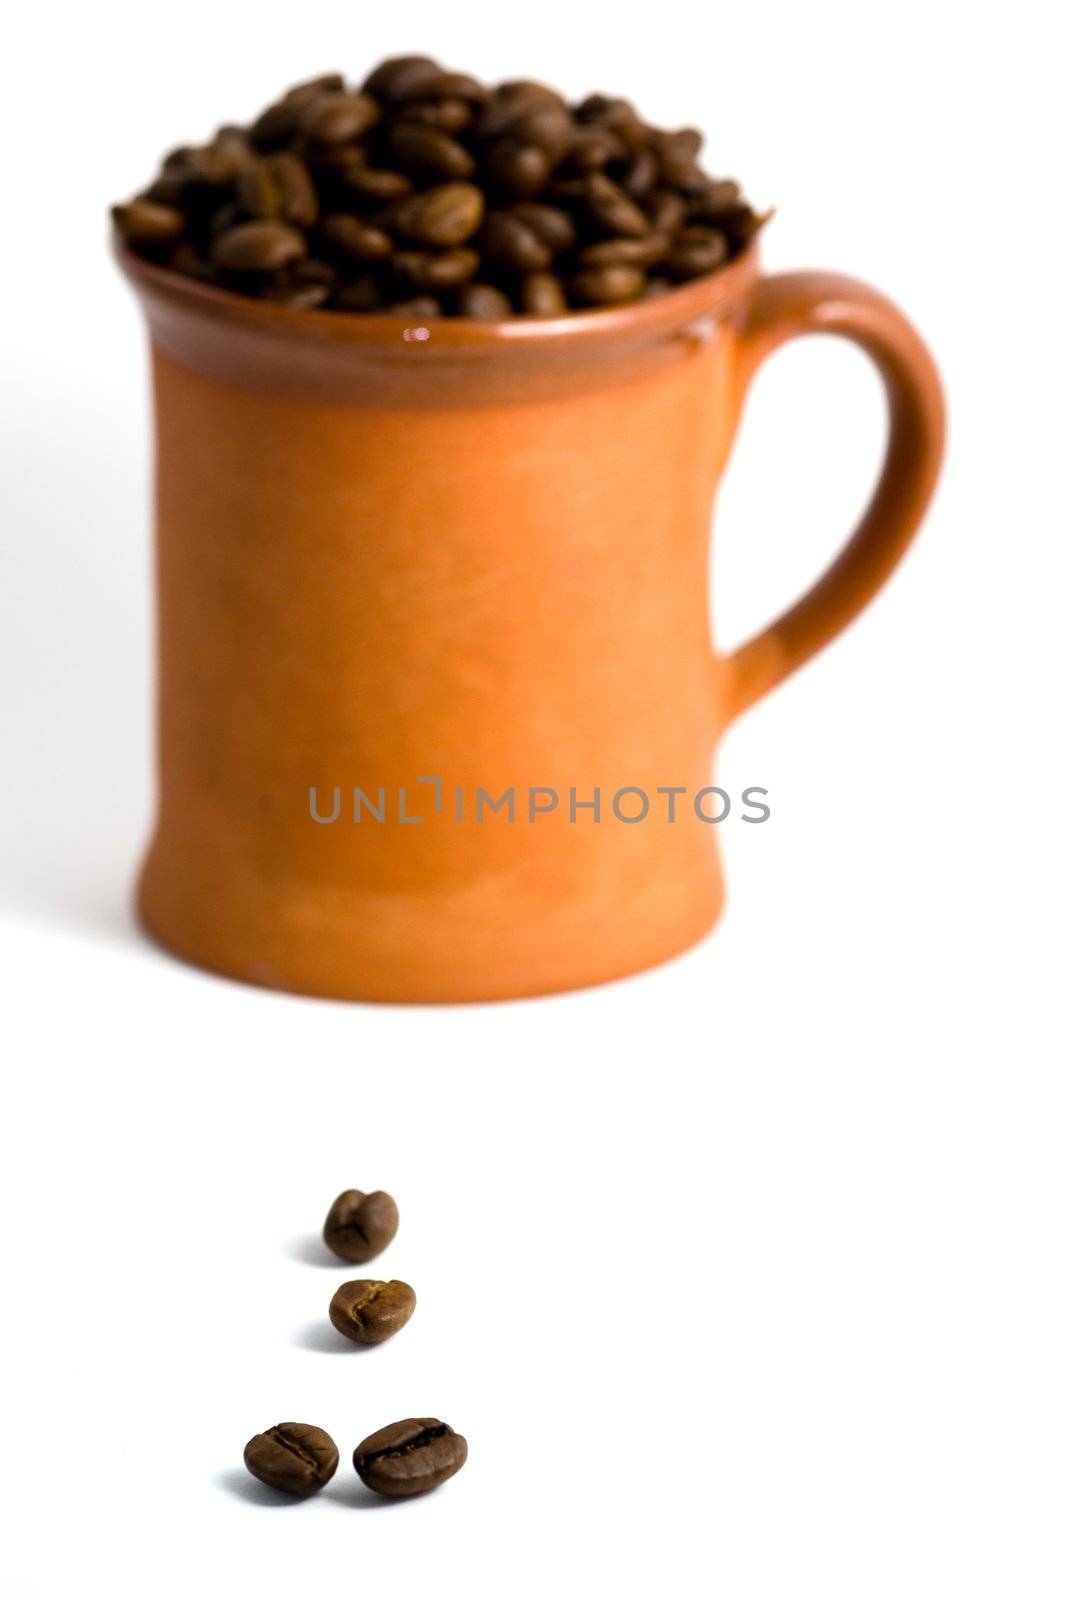 Roasted coffee and cup, white background.